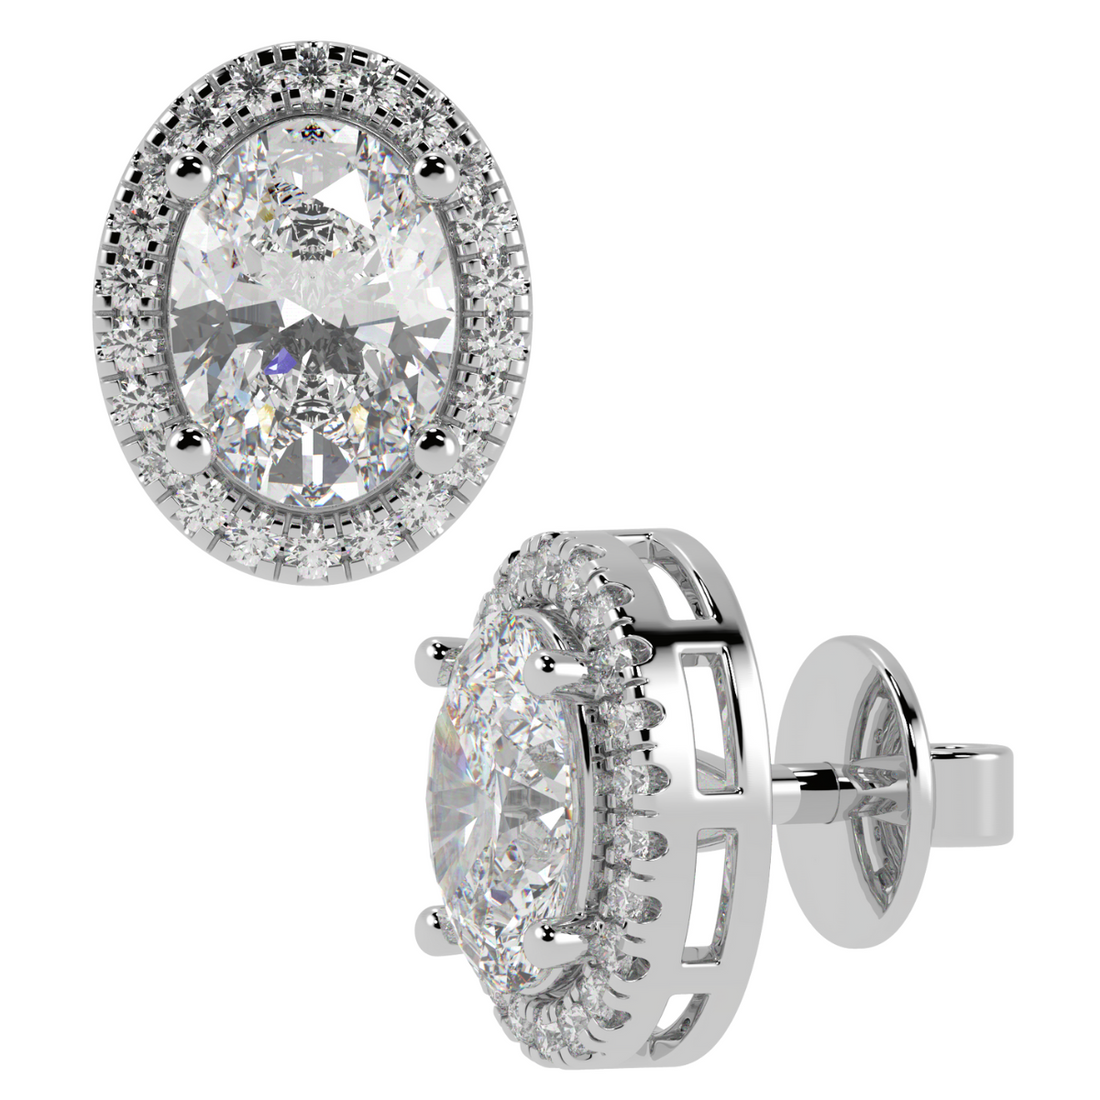 Halo Oval Solitaire Stud Earrings